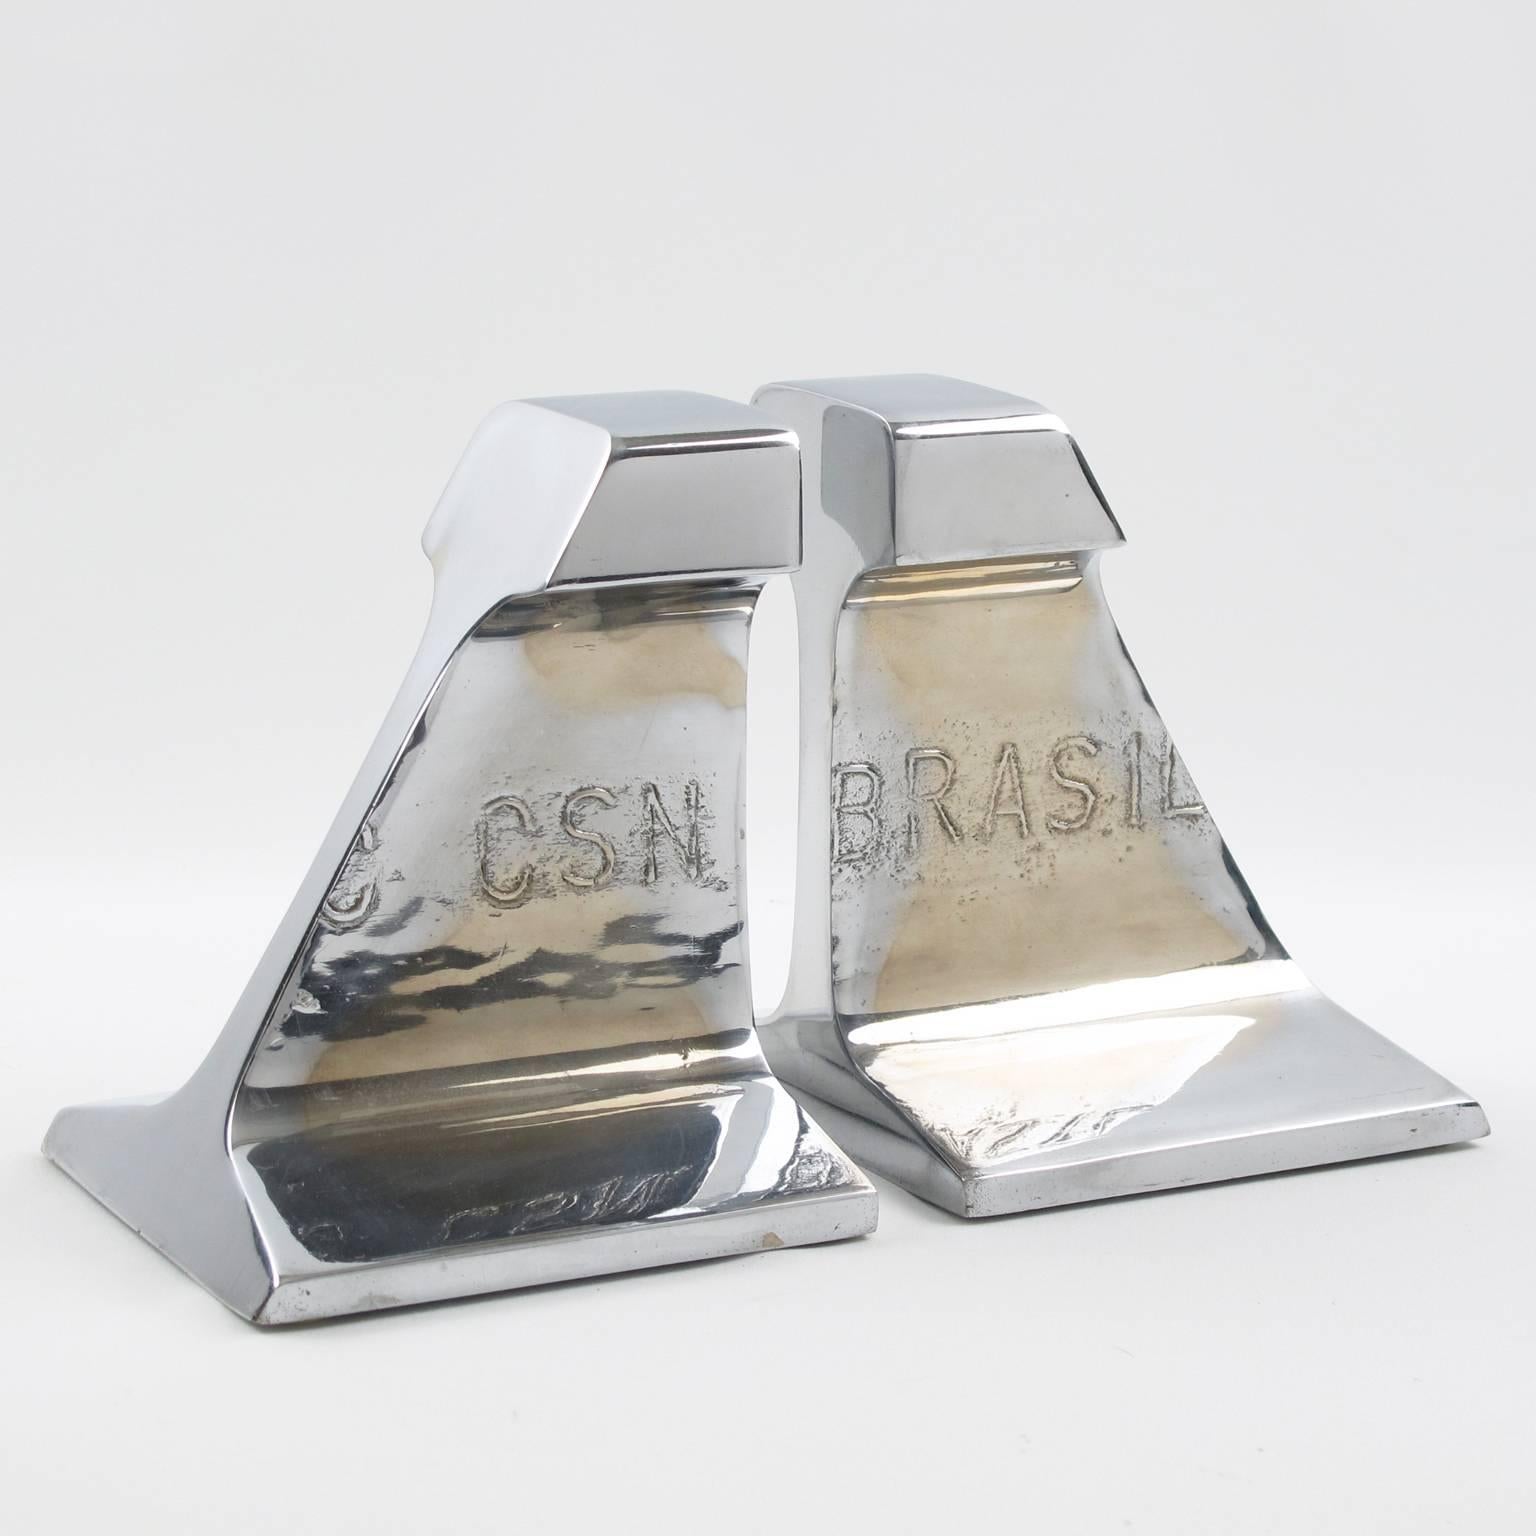 Vintage Industrial pair of bookends. Made of railroad rail sections in polished chrome-plated stainless steel. Marked CSN Brasil on front. We believe these bookends were probably corporate gift. Very heavy and perfectly stabile for books hold use.